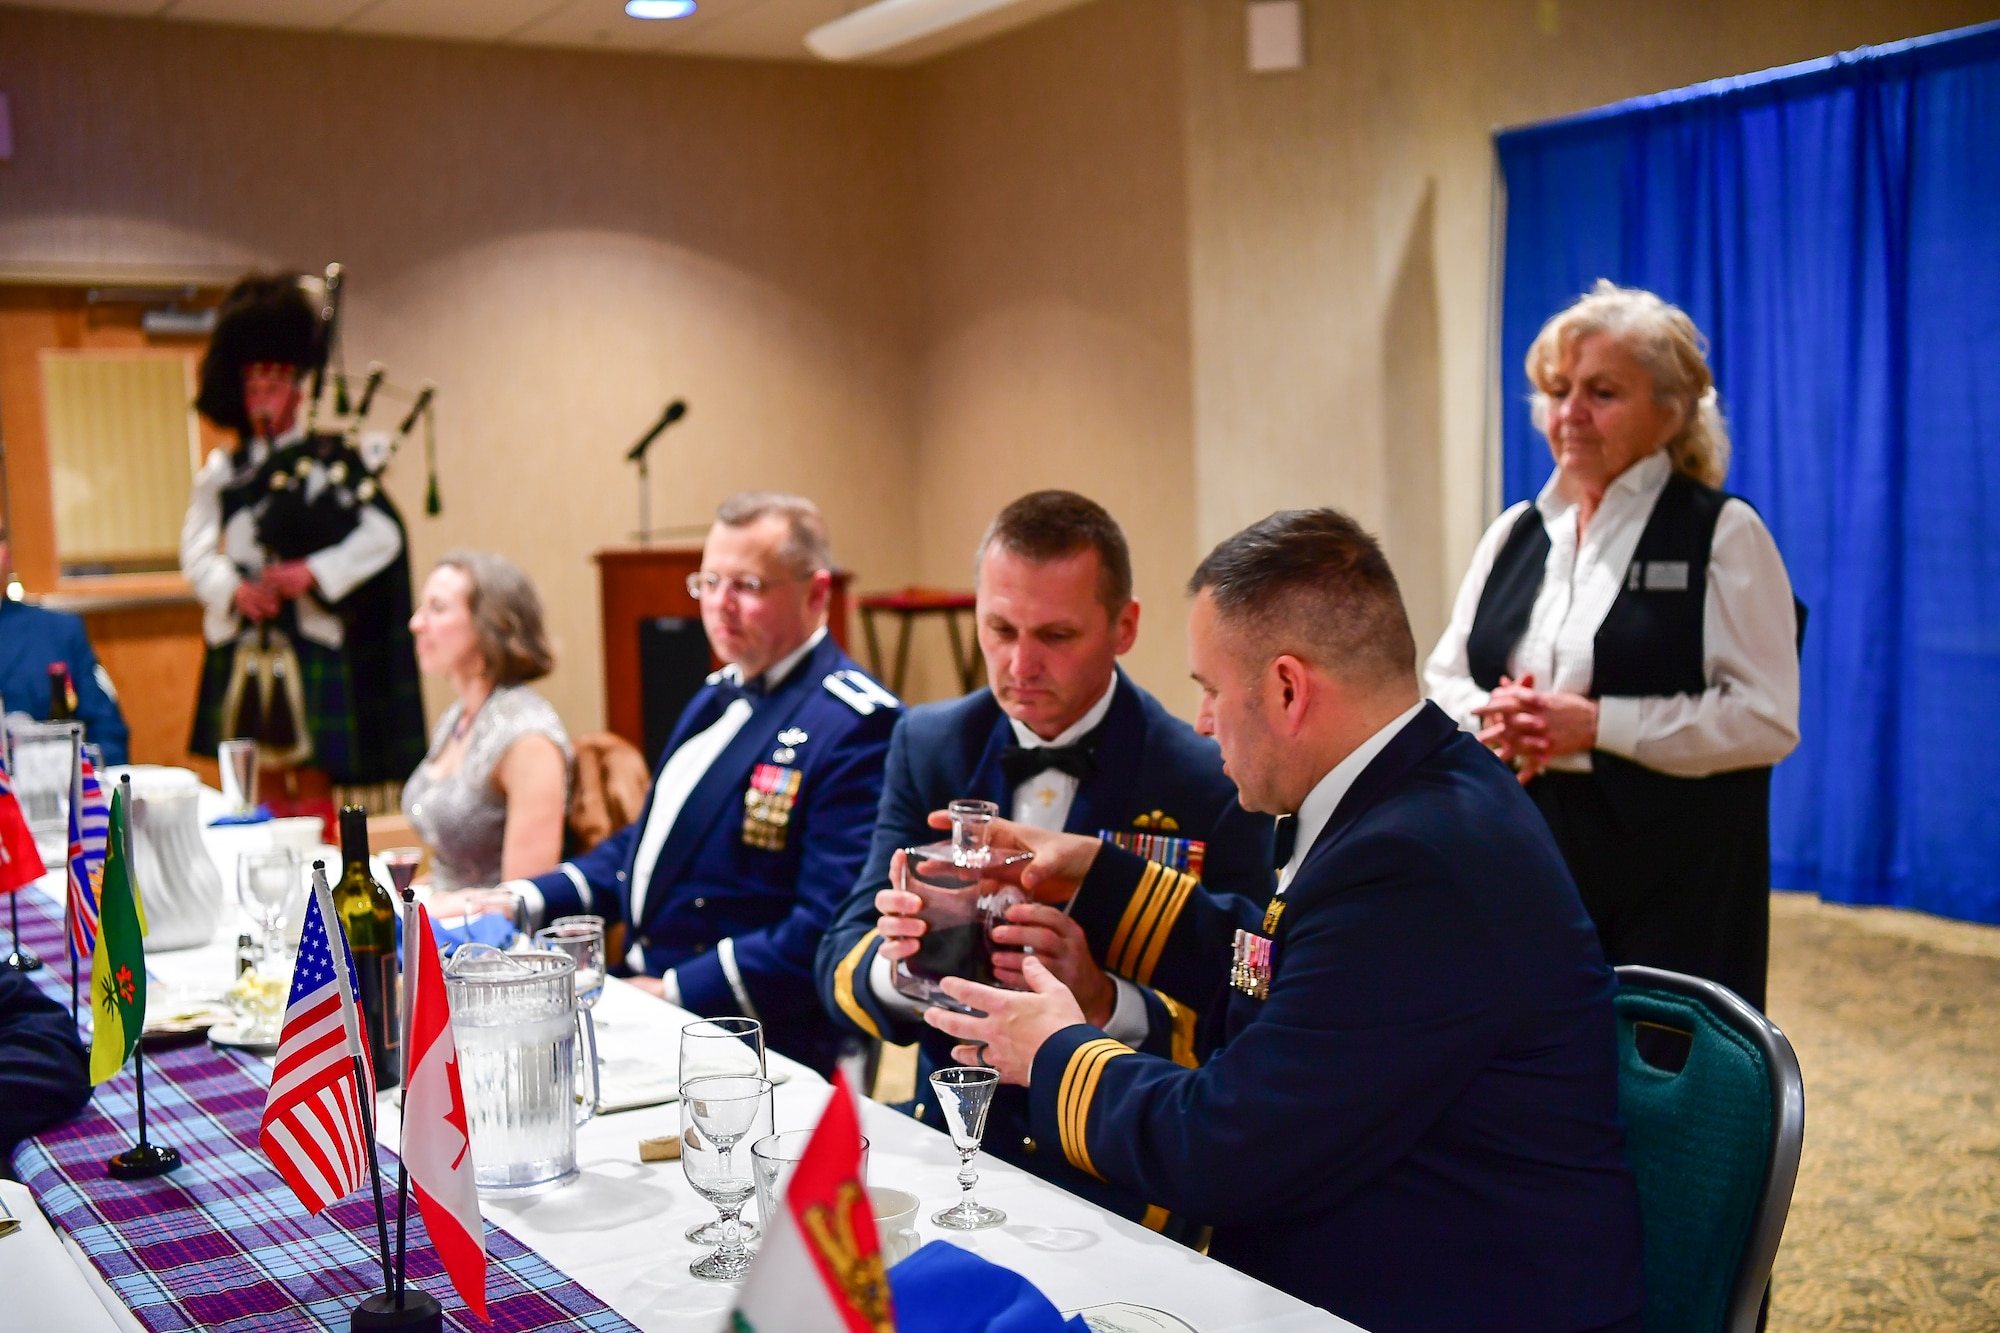 Canadian Brig. Gen. David Cochrane, 2nd Canadian Air Division commander, pass the port to Canadian Lt. Col. Matt Wappler, Wester Air Defense Sector Canadian Detachment commander, during the annual Canadian Mess Dinner marking the 93rd anniversary of the formation of the Royal Canadian Air Force.  The manner in which the port is passed is military service specific.  In case of the Air Force, the port never touches the table to symbolize flight.  The port is used for all of the official toasts during the Mess Dinner.  (U.S. Air Force photo by Kimberly D. Burke)